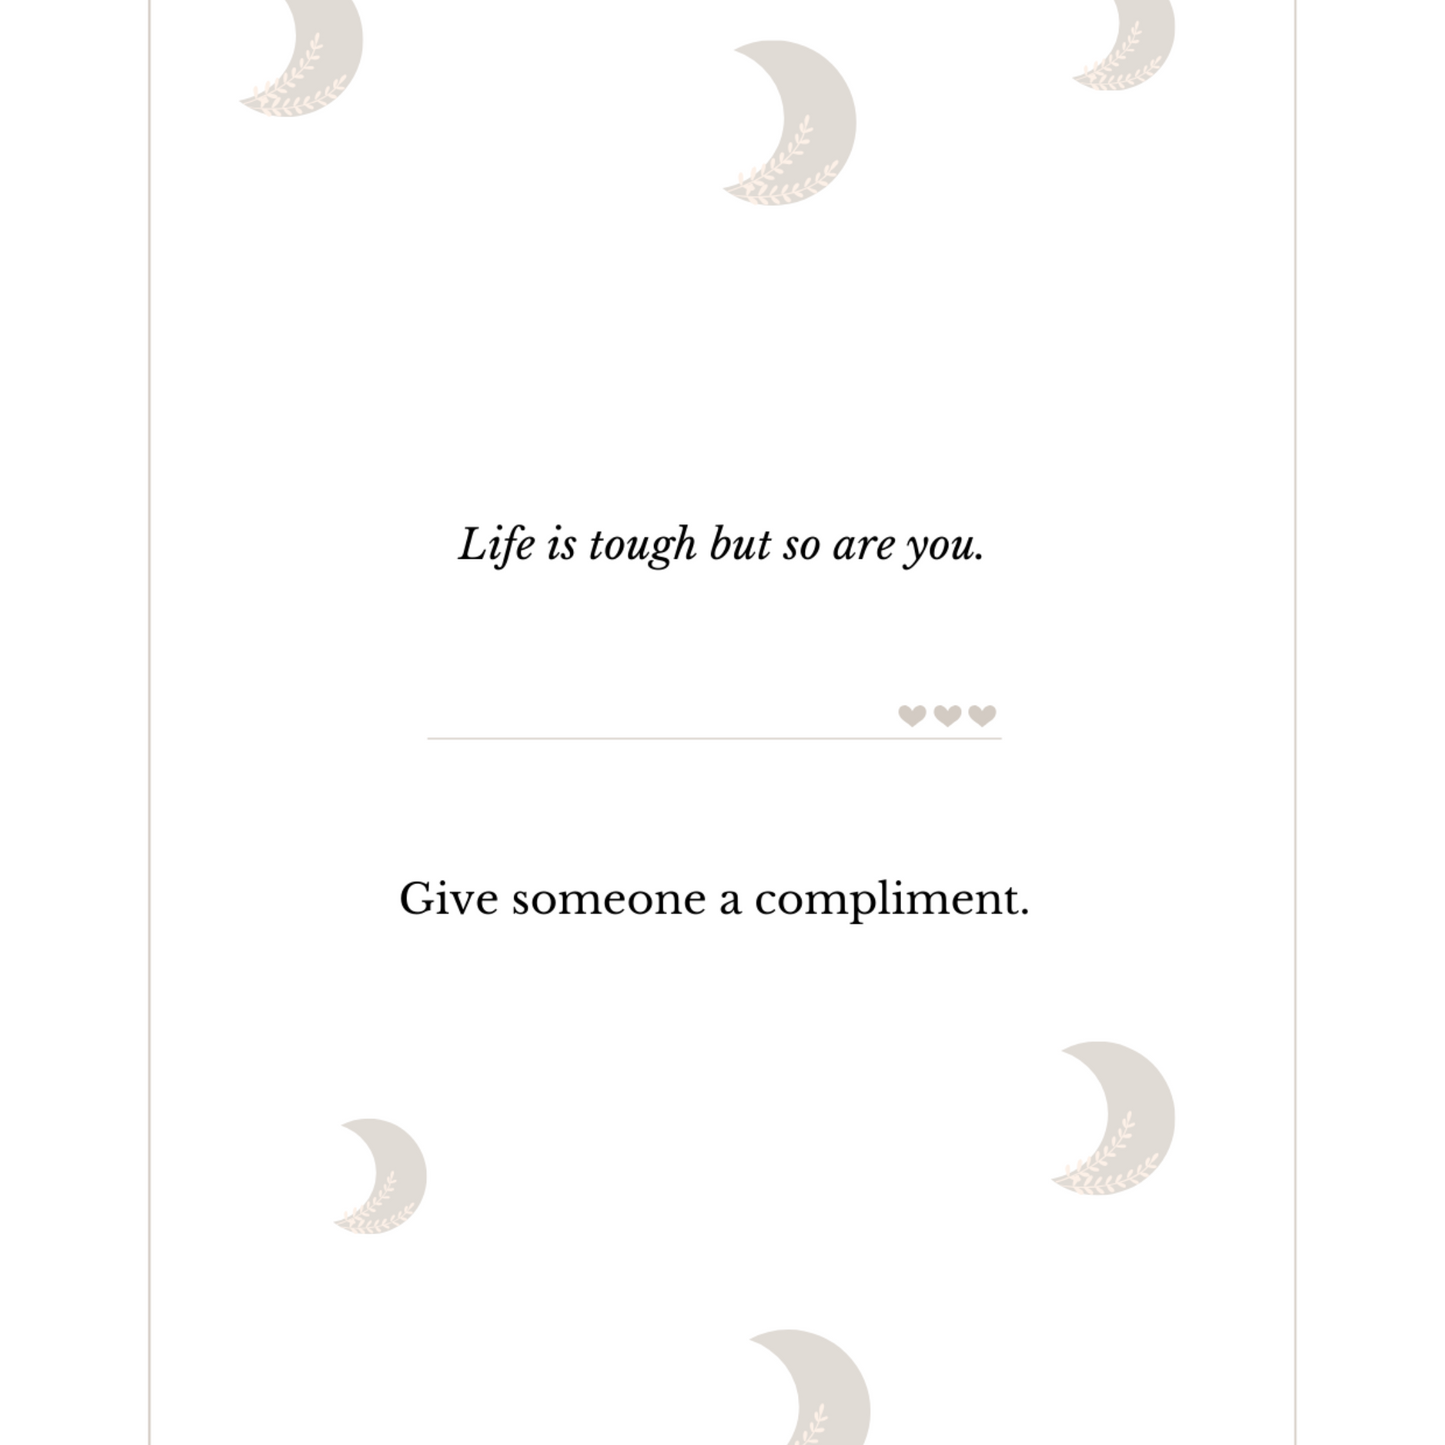 30 MINIMALIST CARDS, INSPIRATIONAL QUOTES + ACTIVITIES TO DO, ENGLISH VERSION